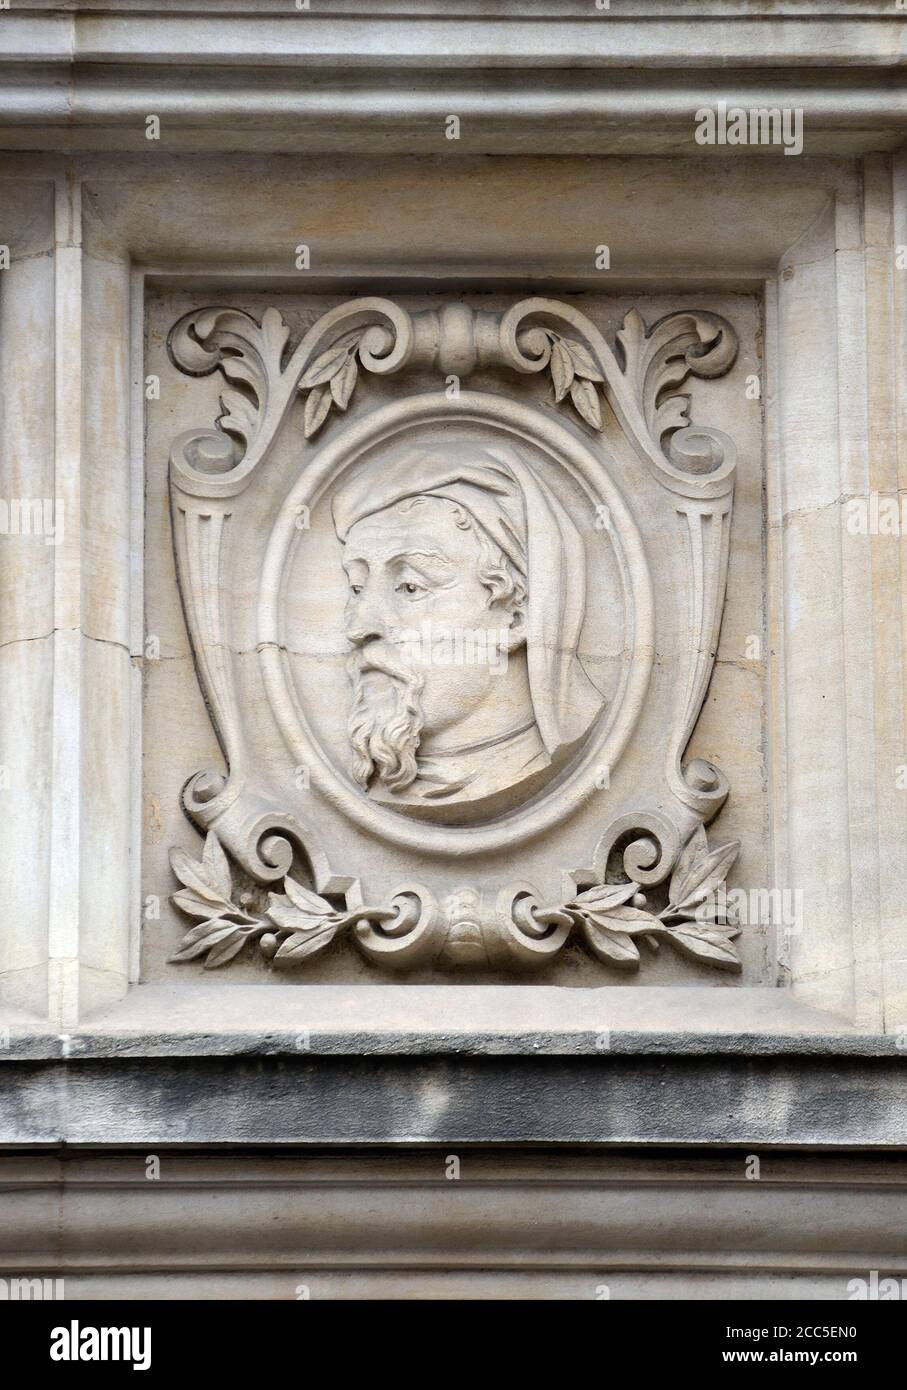 London, England, UK. Head of Geoffrey Chaucer ( 1340s – 1400) English poet and author of the Canterbury Tales, on the facade of the Old Westminster Li Stock Photo